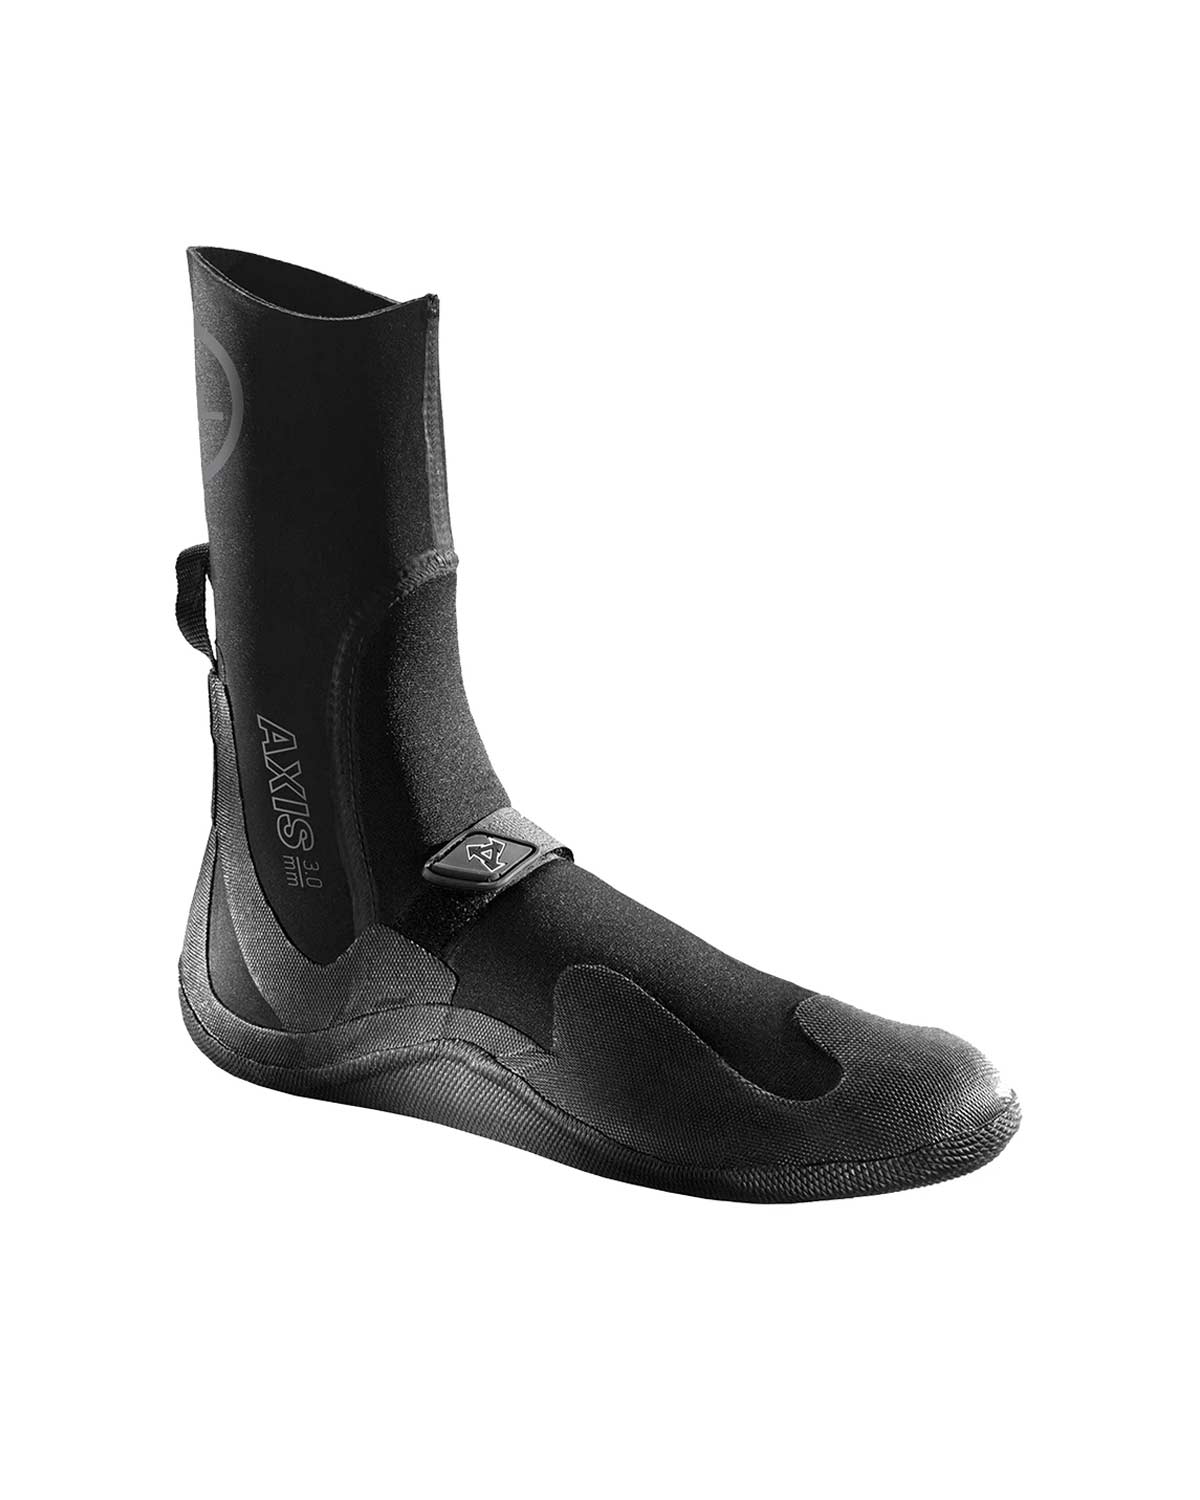 3mm XCEL AXIS Round Toe Boots